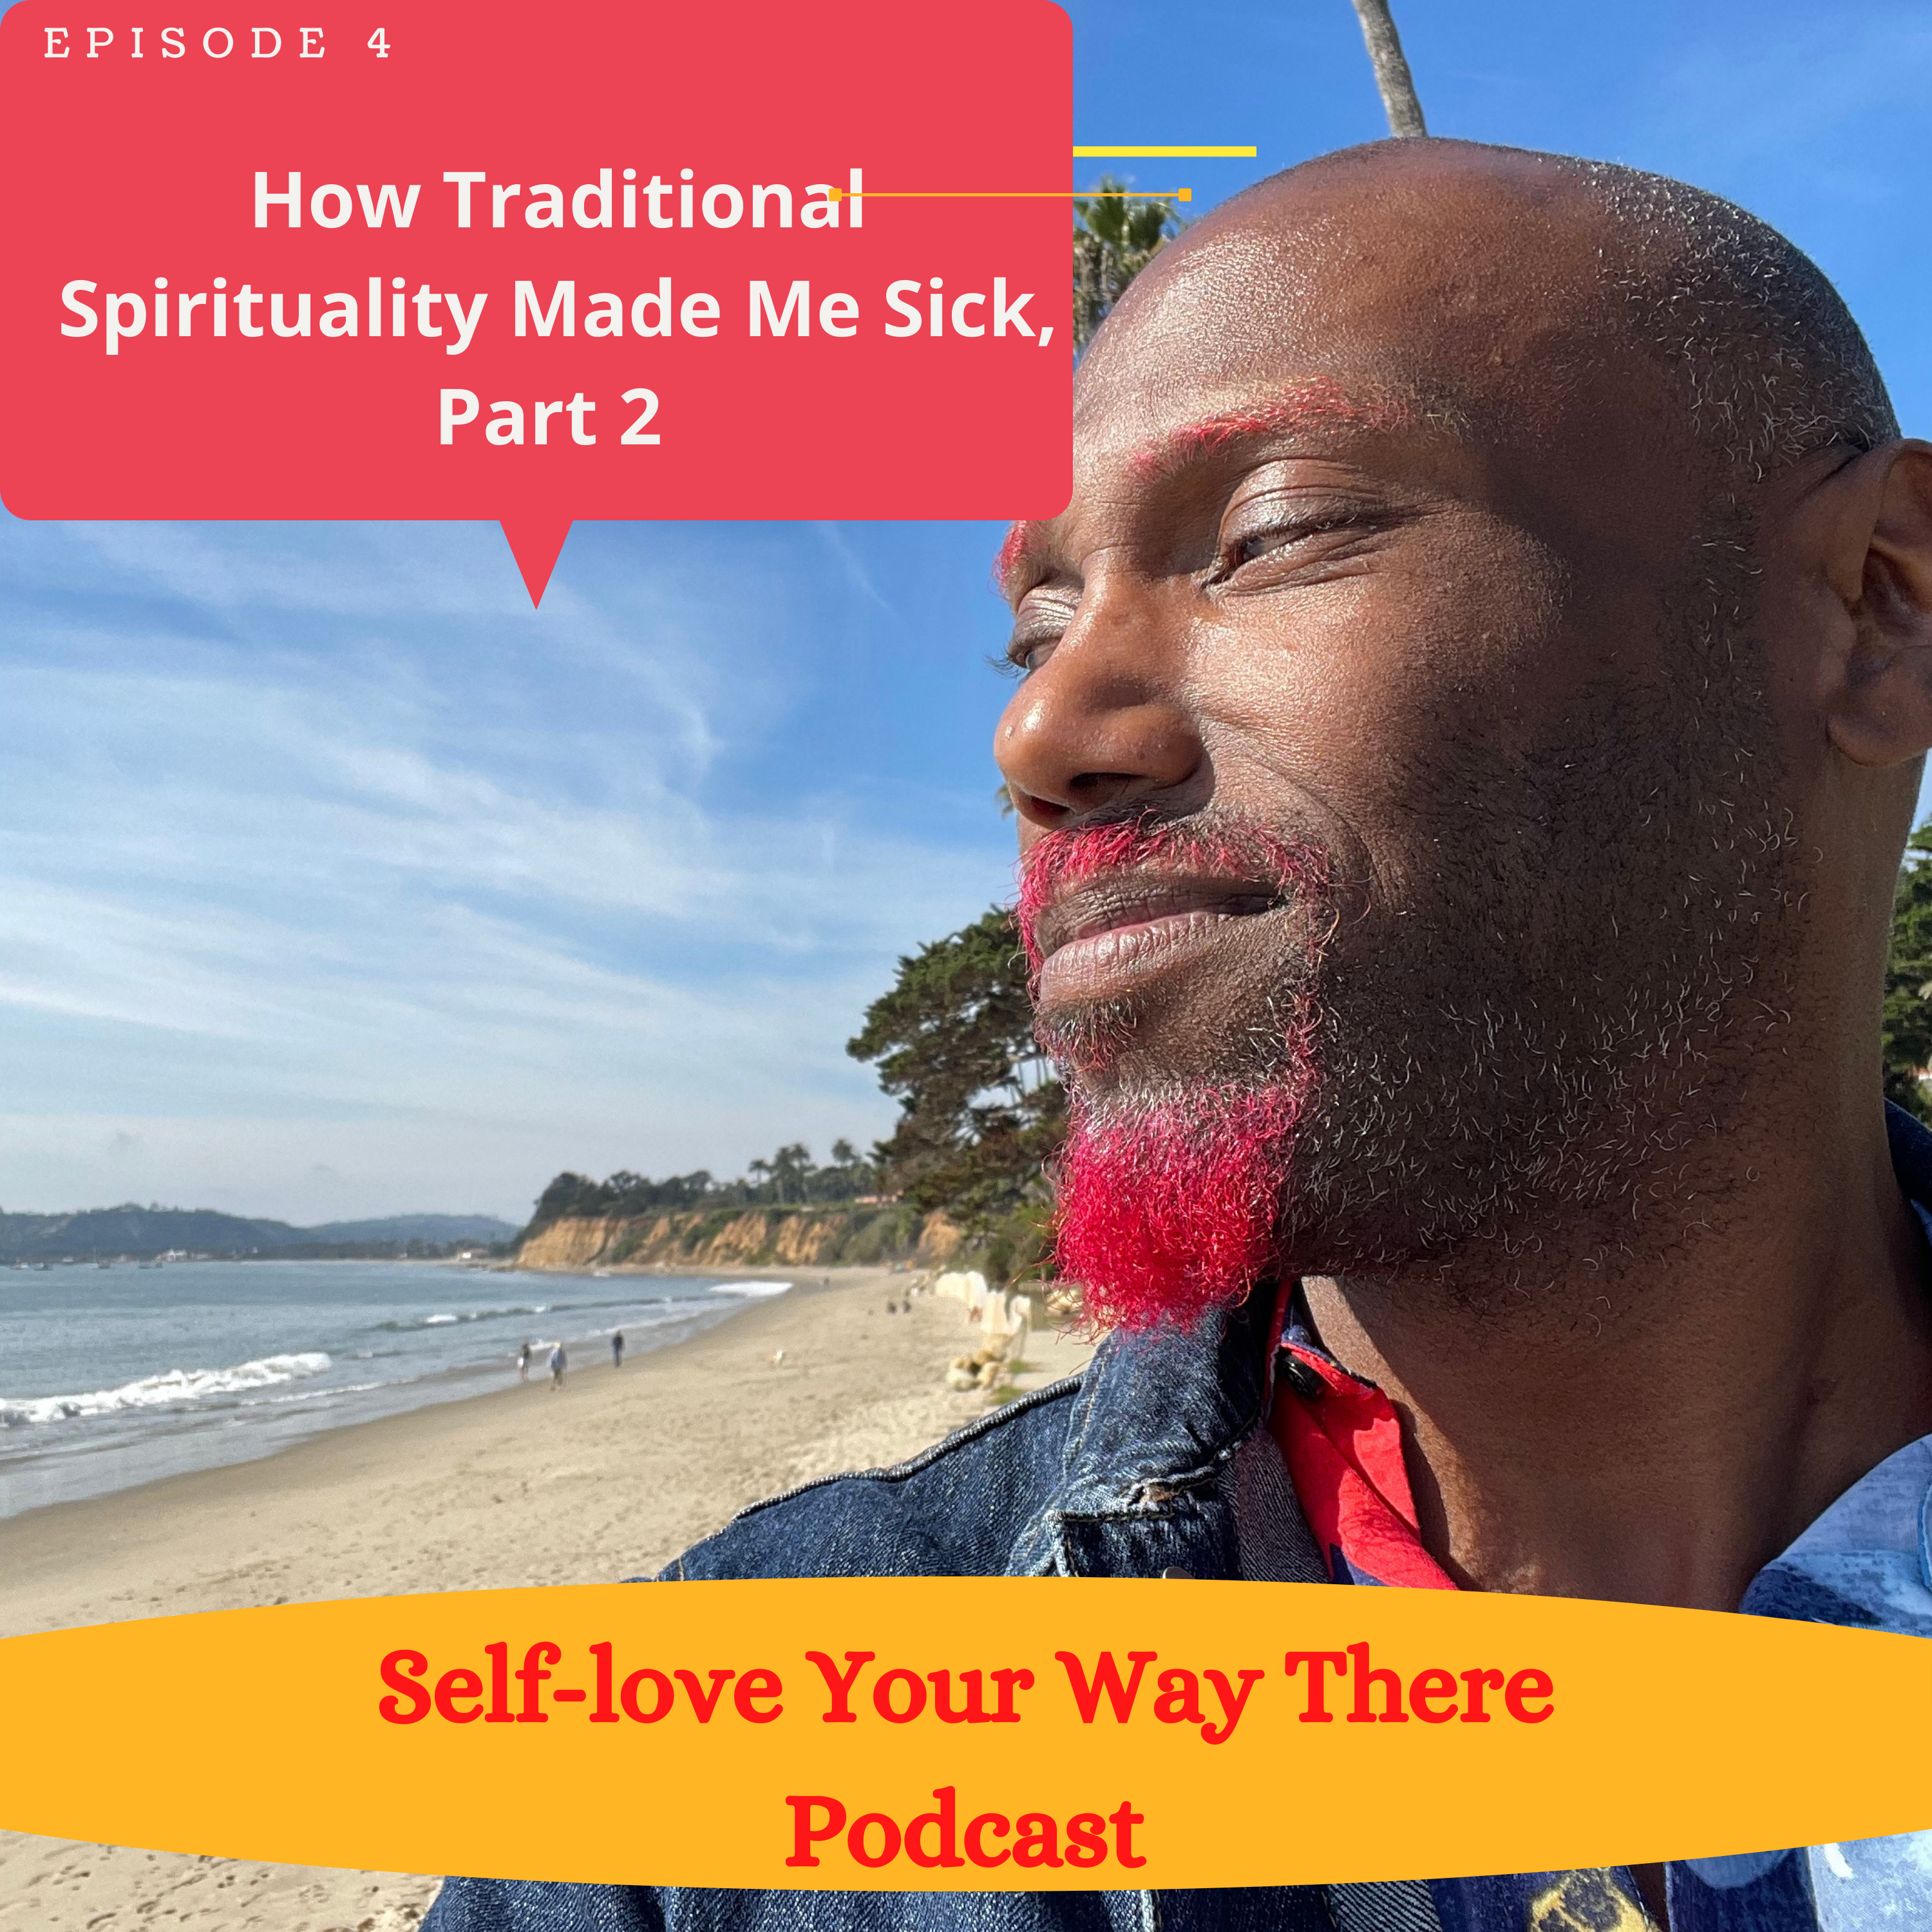 How Traditional Spirituality Made Me Sick, Part 2